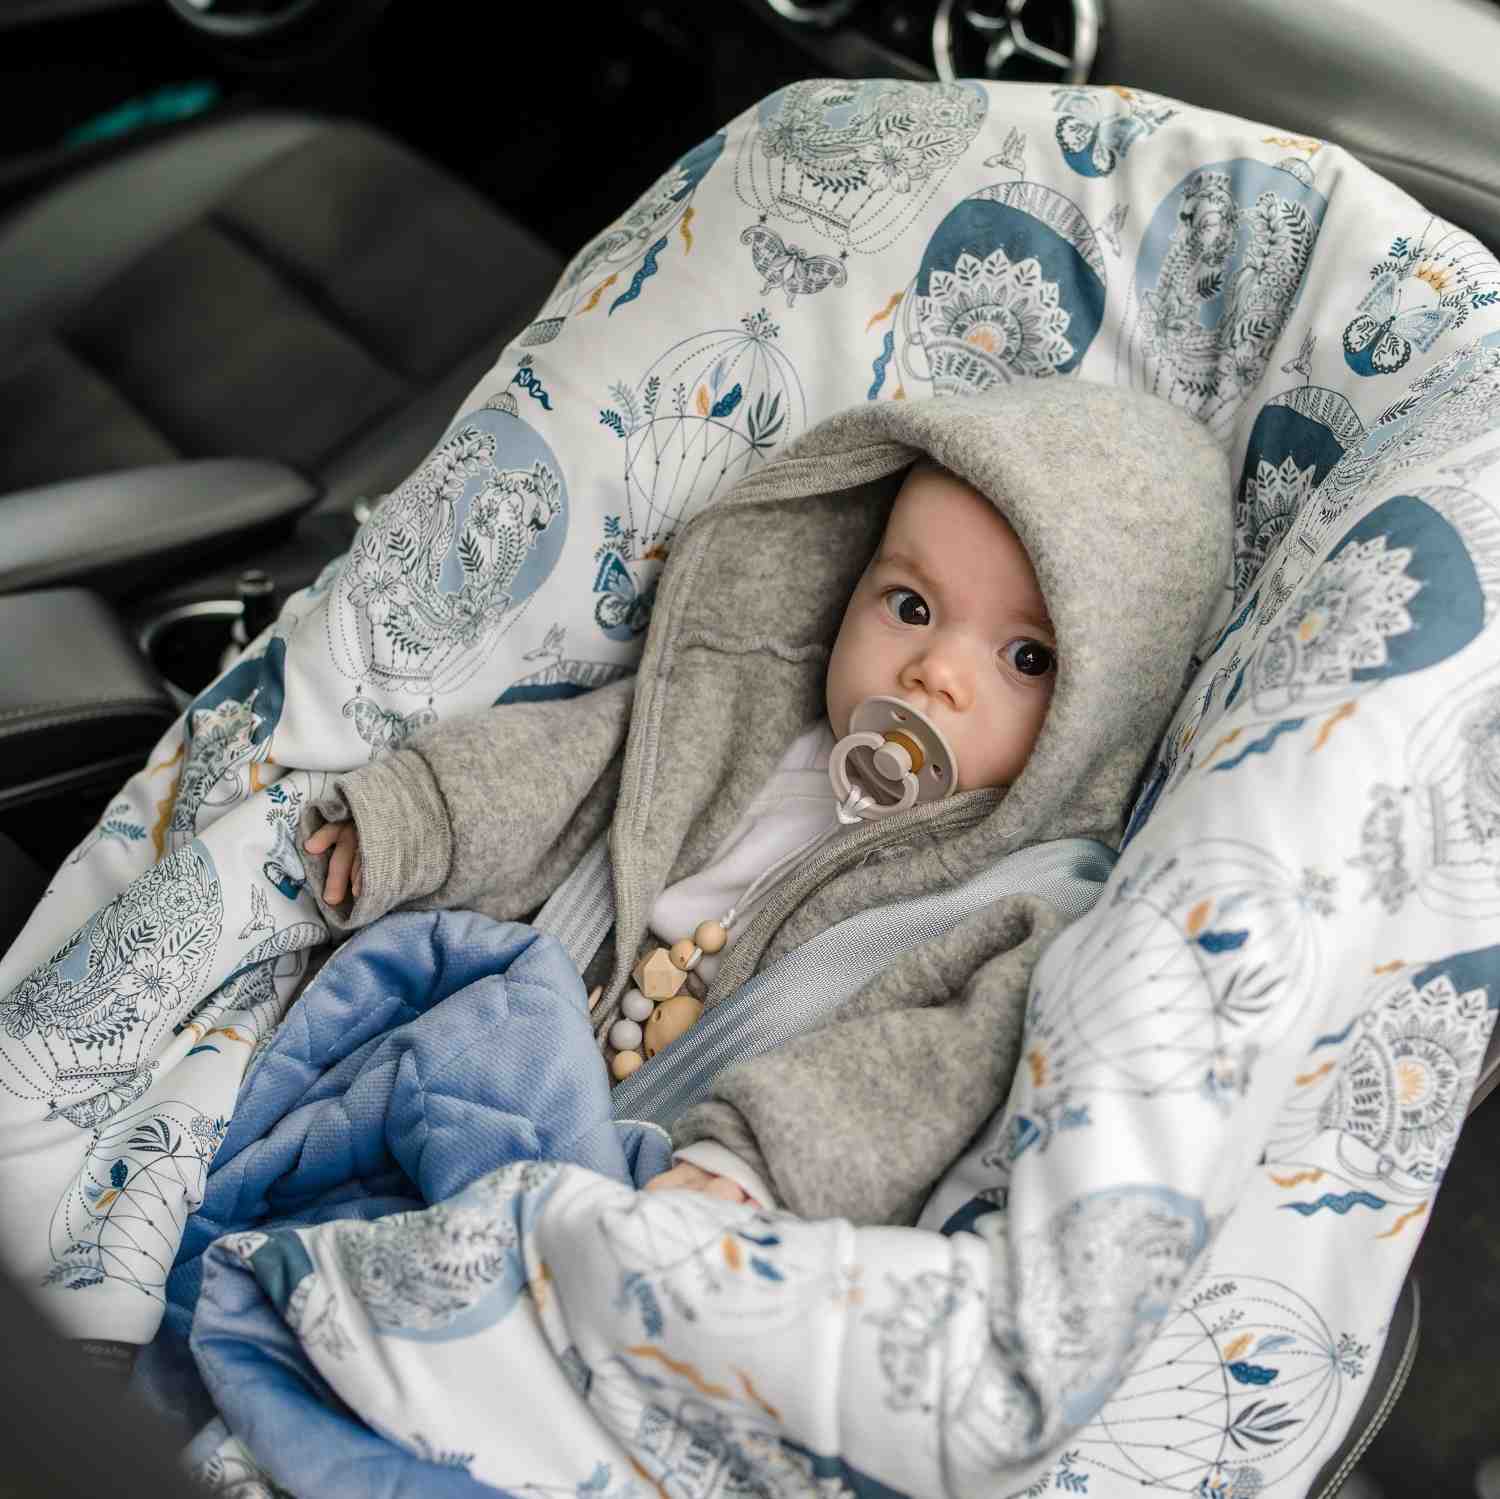 Car seat blanket - Dundee and friends